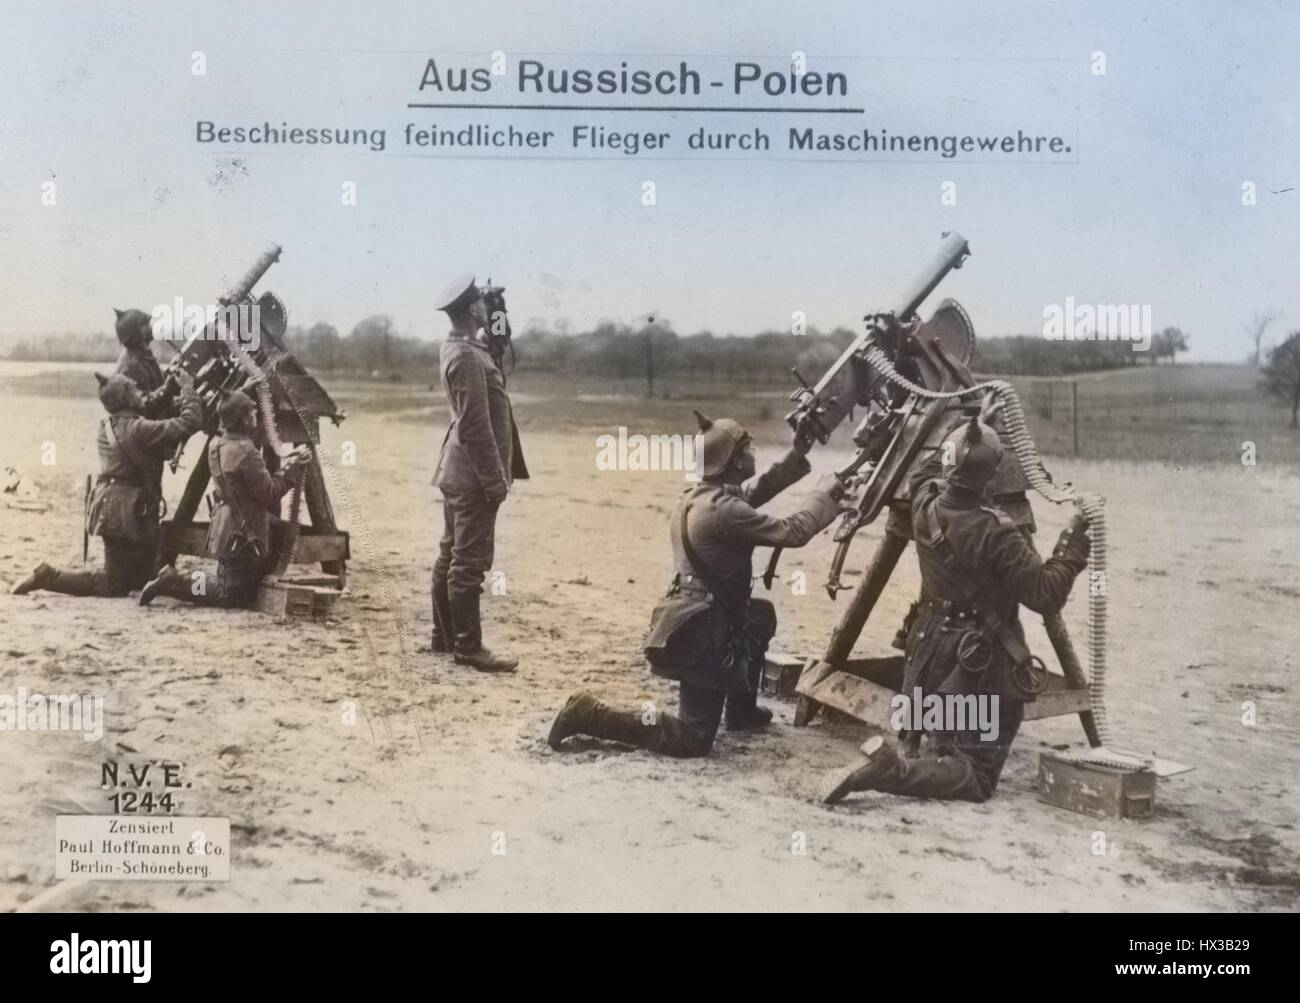 German army shooting down enemy aircraft with machine guns, 1915. From the New York Public Library. Note: Image has been digitally colorized using a modern process. Colors may not be period-accurate. Stock Photo